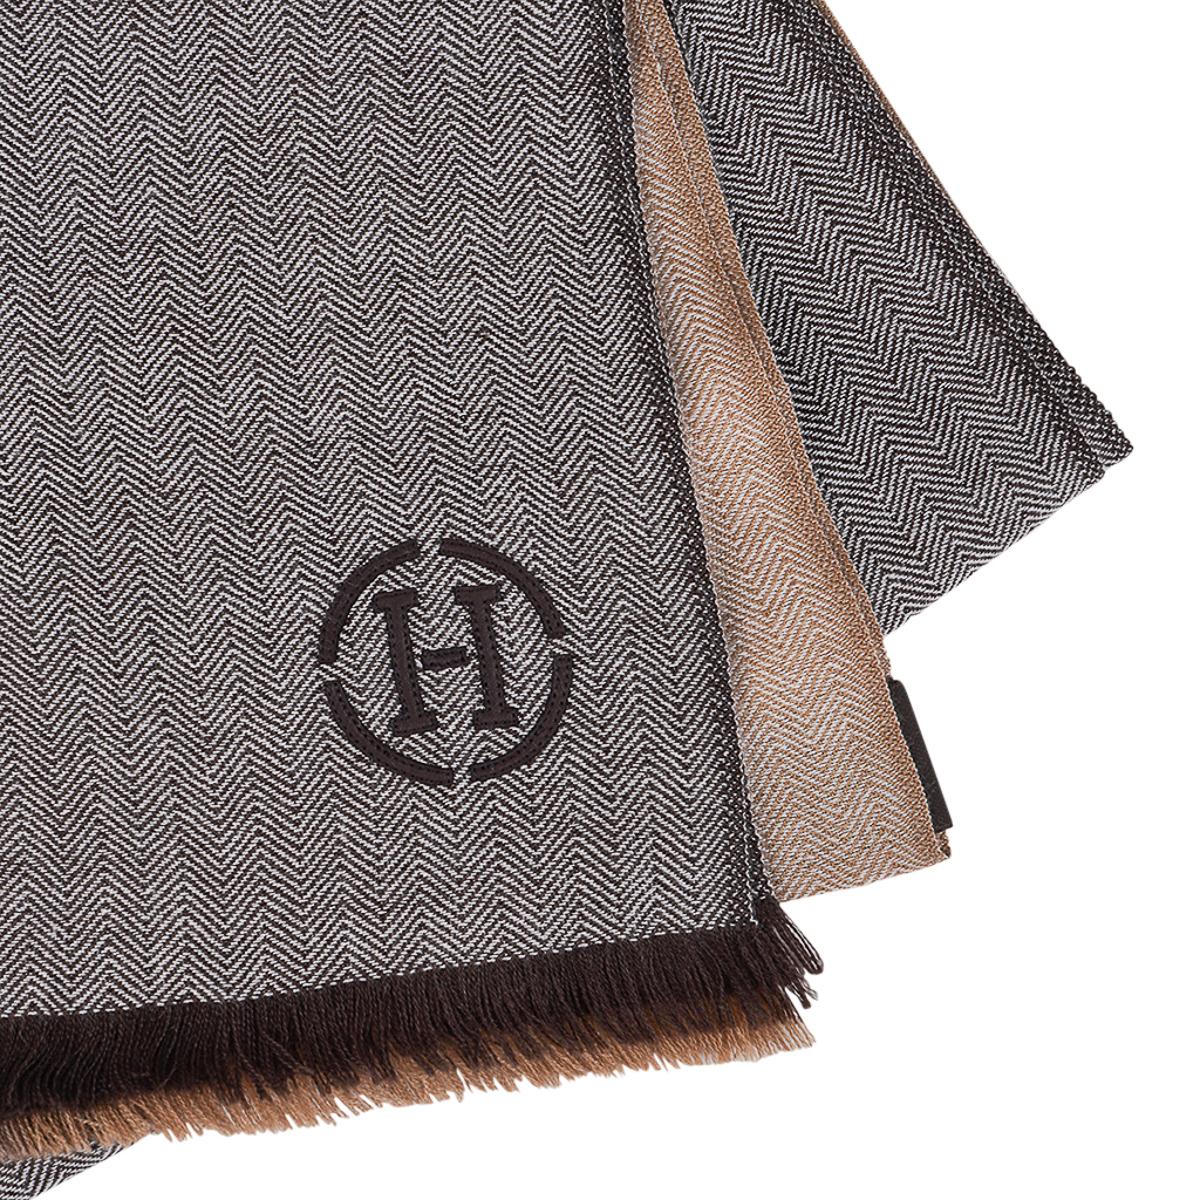 Mightychic offers an Hermes Himalaya Colorblock Artisanale Muffler featured in Brun, Taupe and Camel.
Hand dyed and woven very soft cashmere muffler is created into the iconic Hermes herringbone pattern.
Encircled Brown leather H at